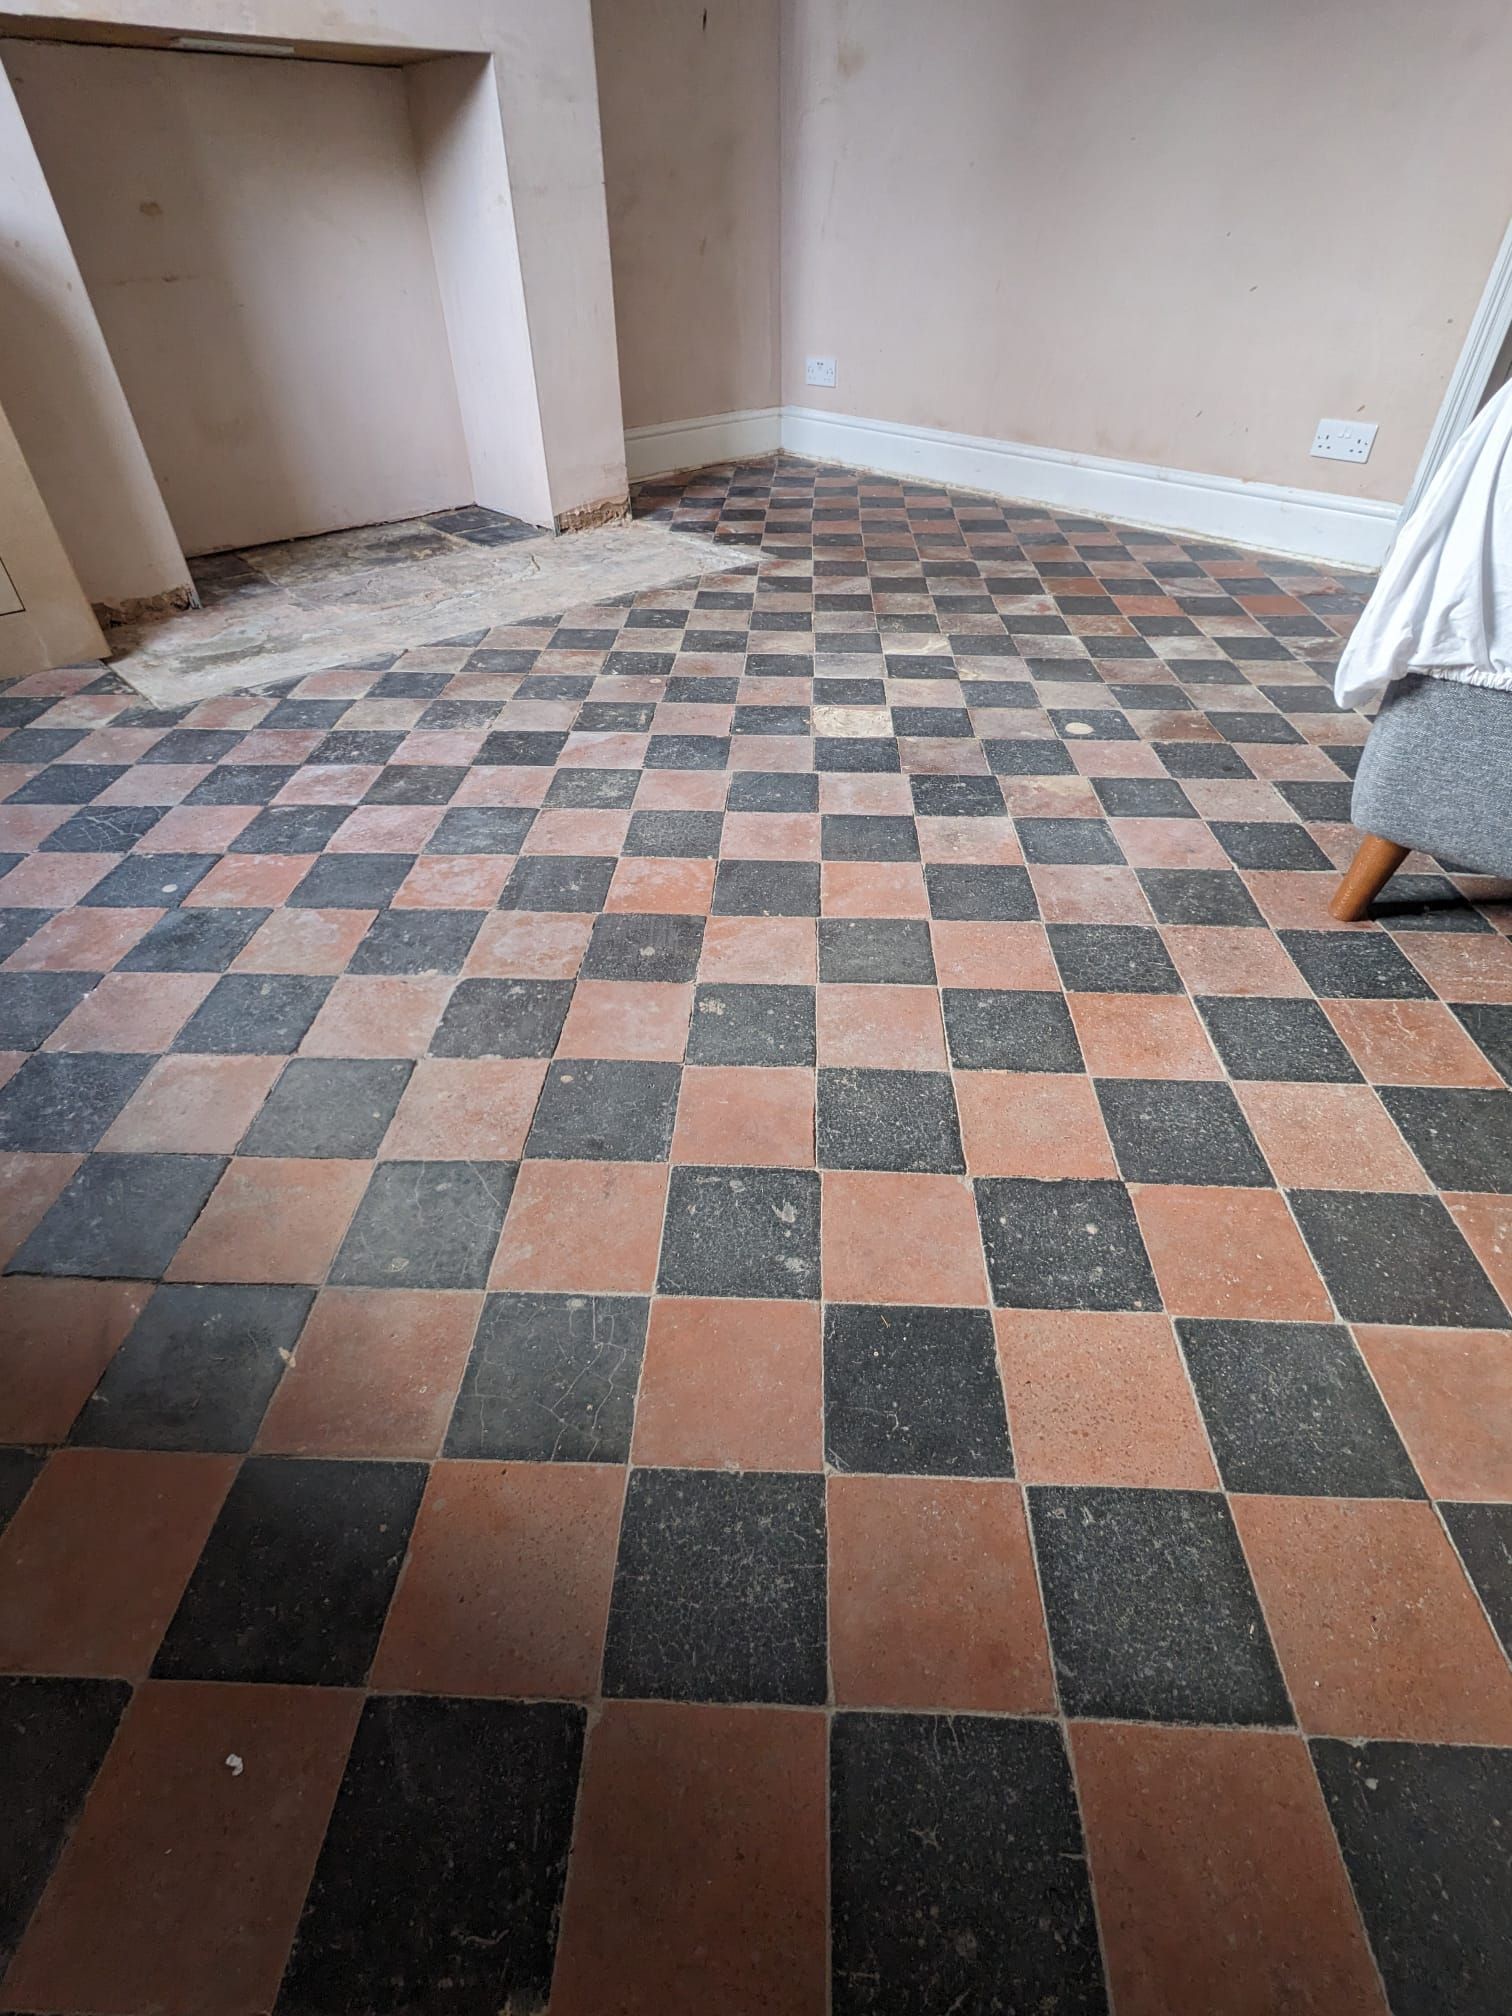 Deep cleaning, sealing and restoring a quarry tiled floor in Stockport, Greater Manchester